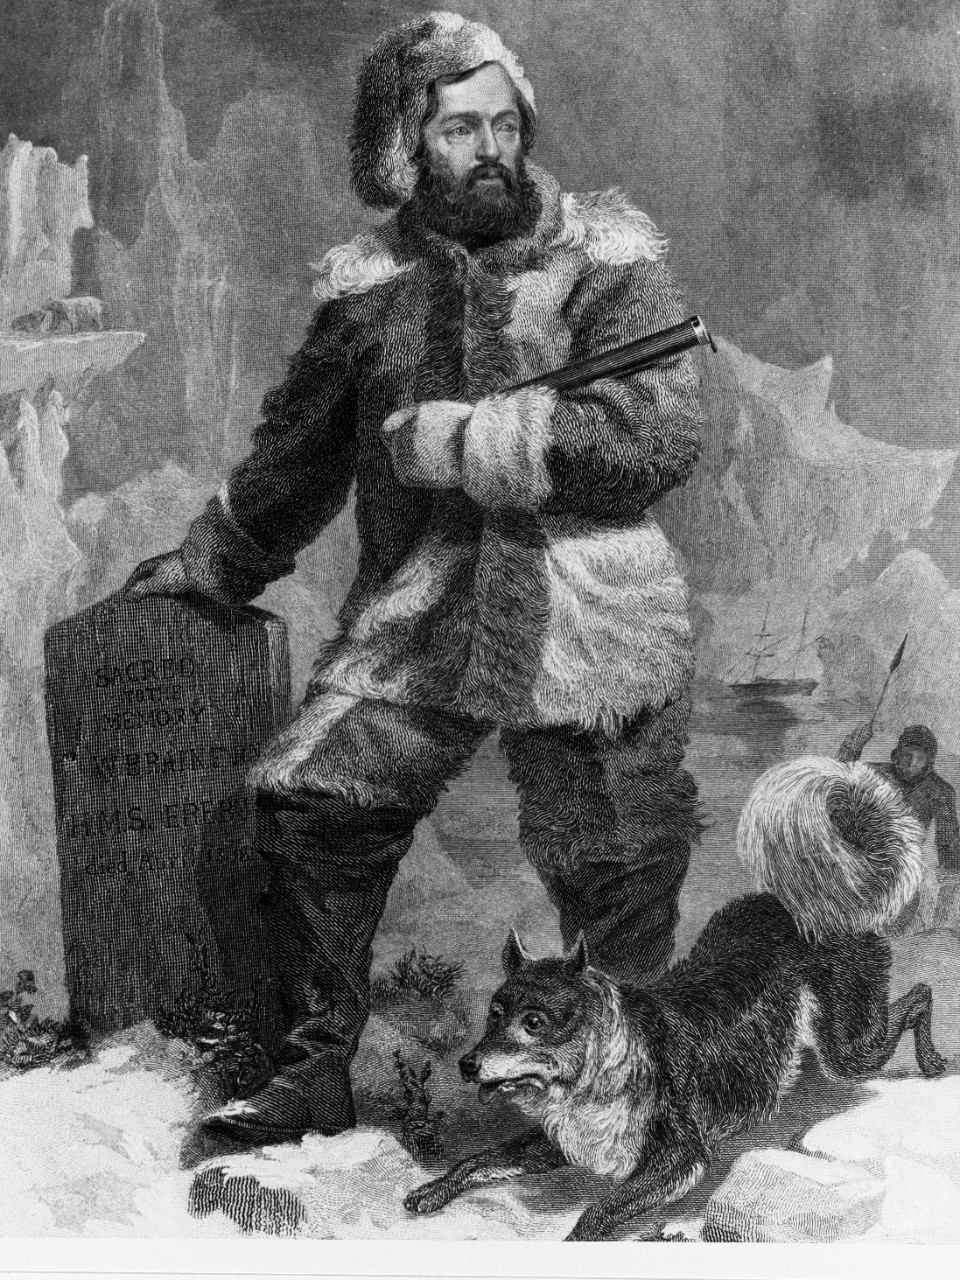 portrait of Kane in the Arctic standing on snow with a dog at his feet. 